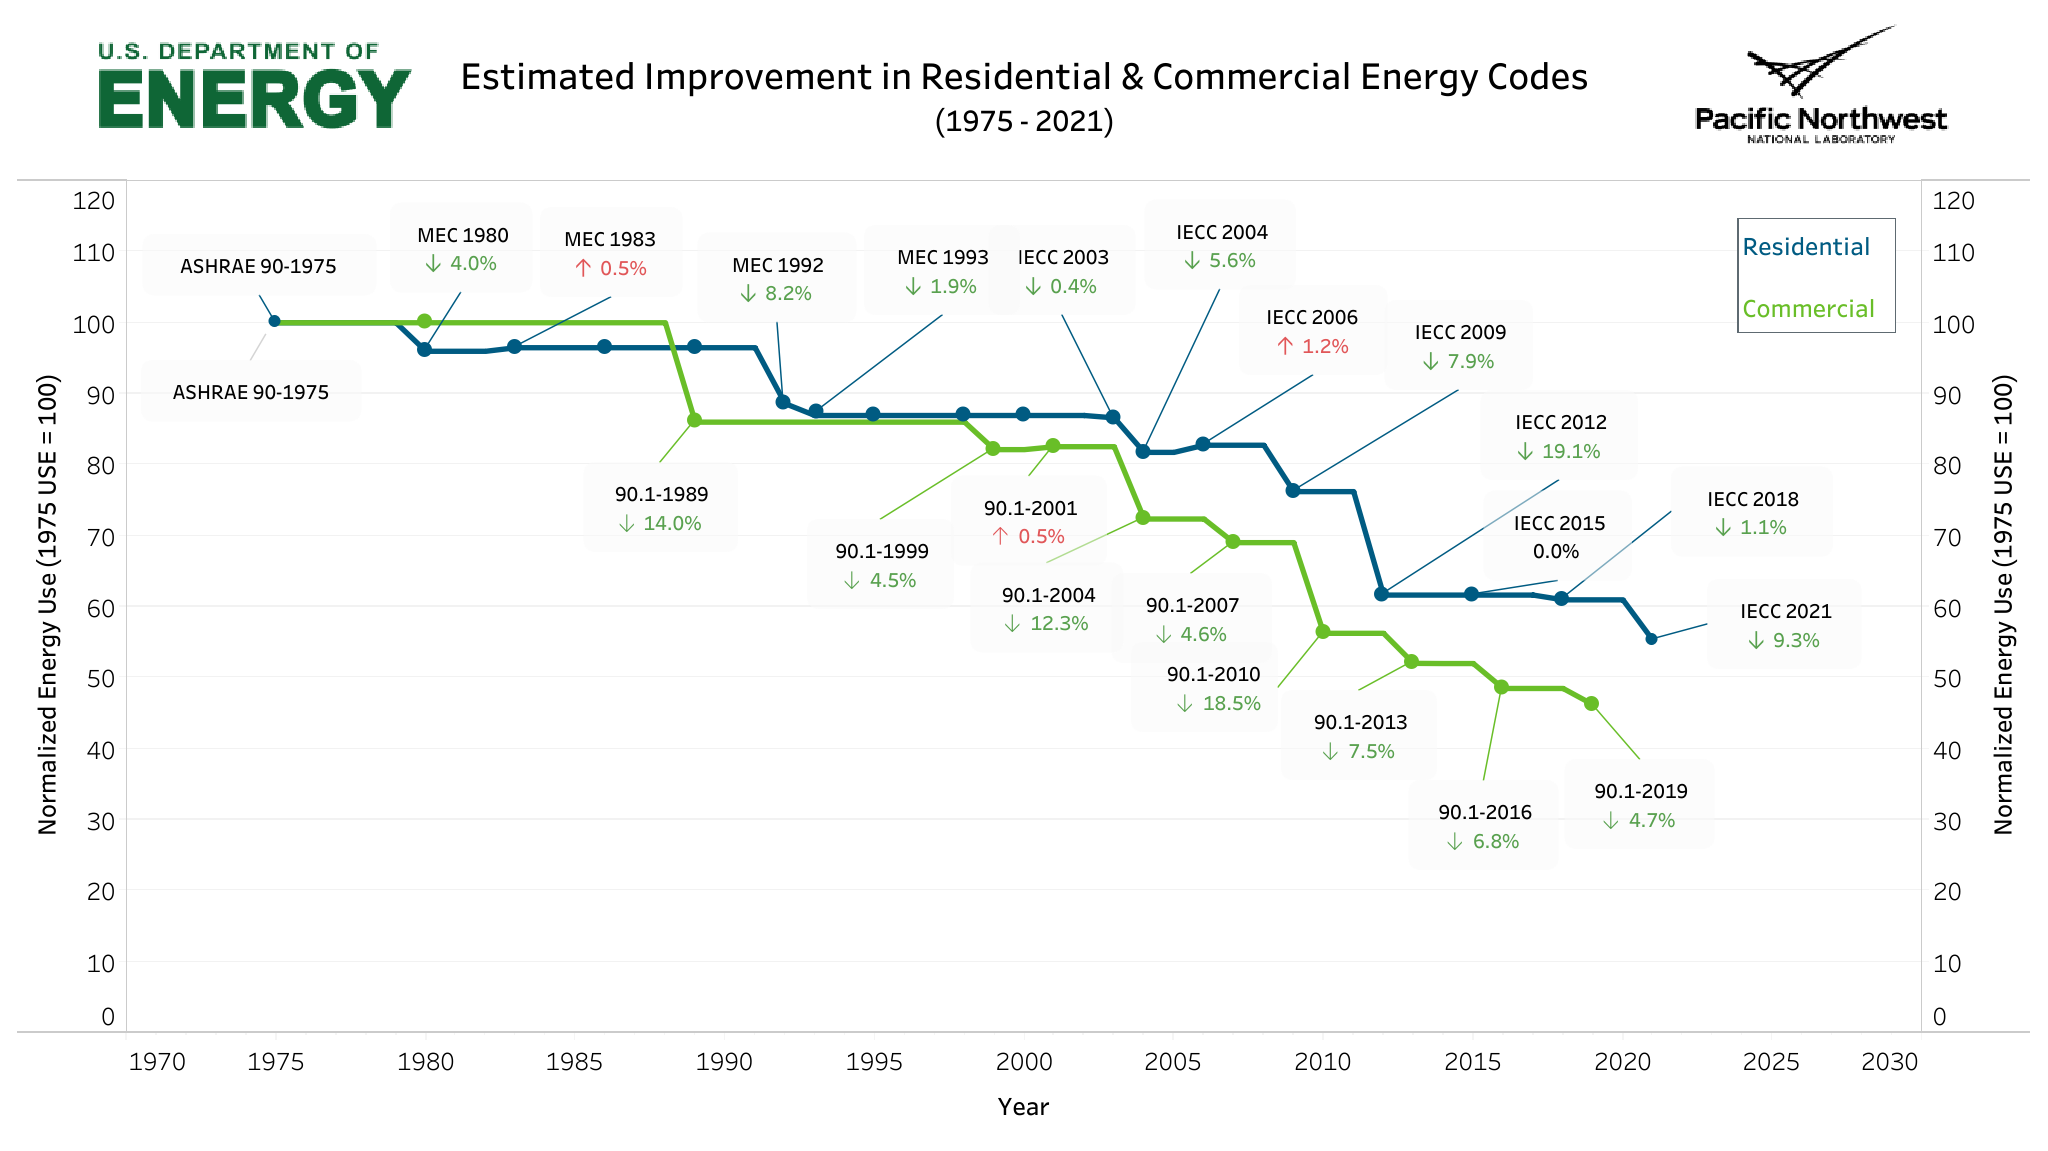 Chart displaying the estimated improvement in residential and commercial building energy codes from 1975 to 2021.